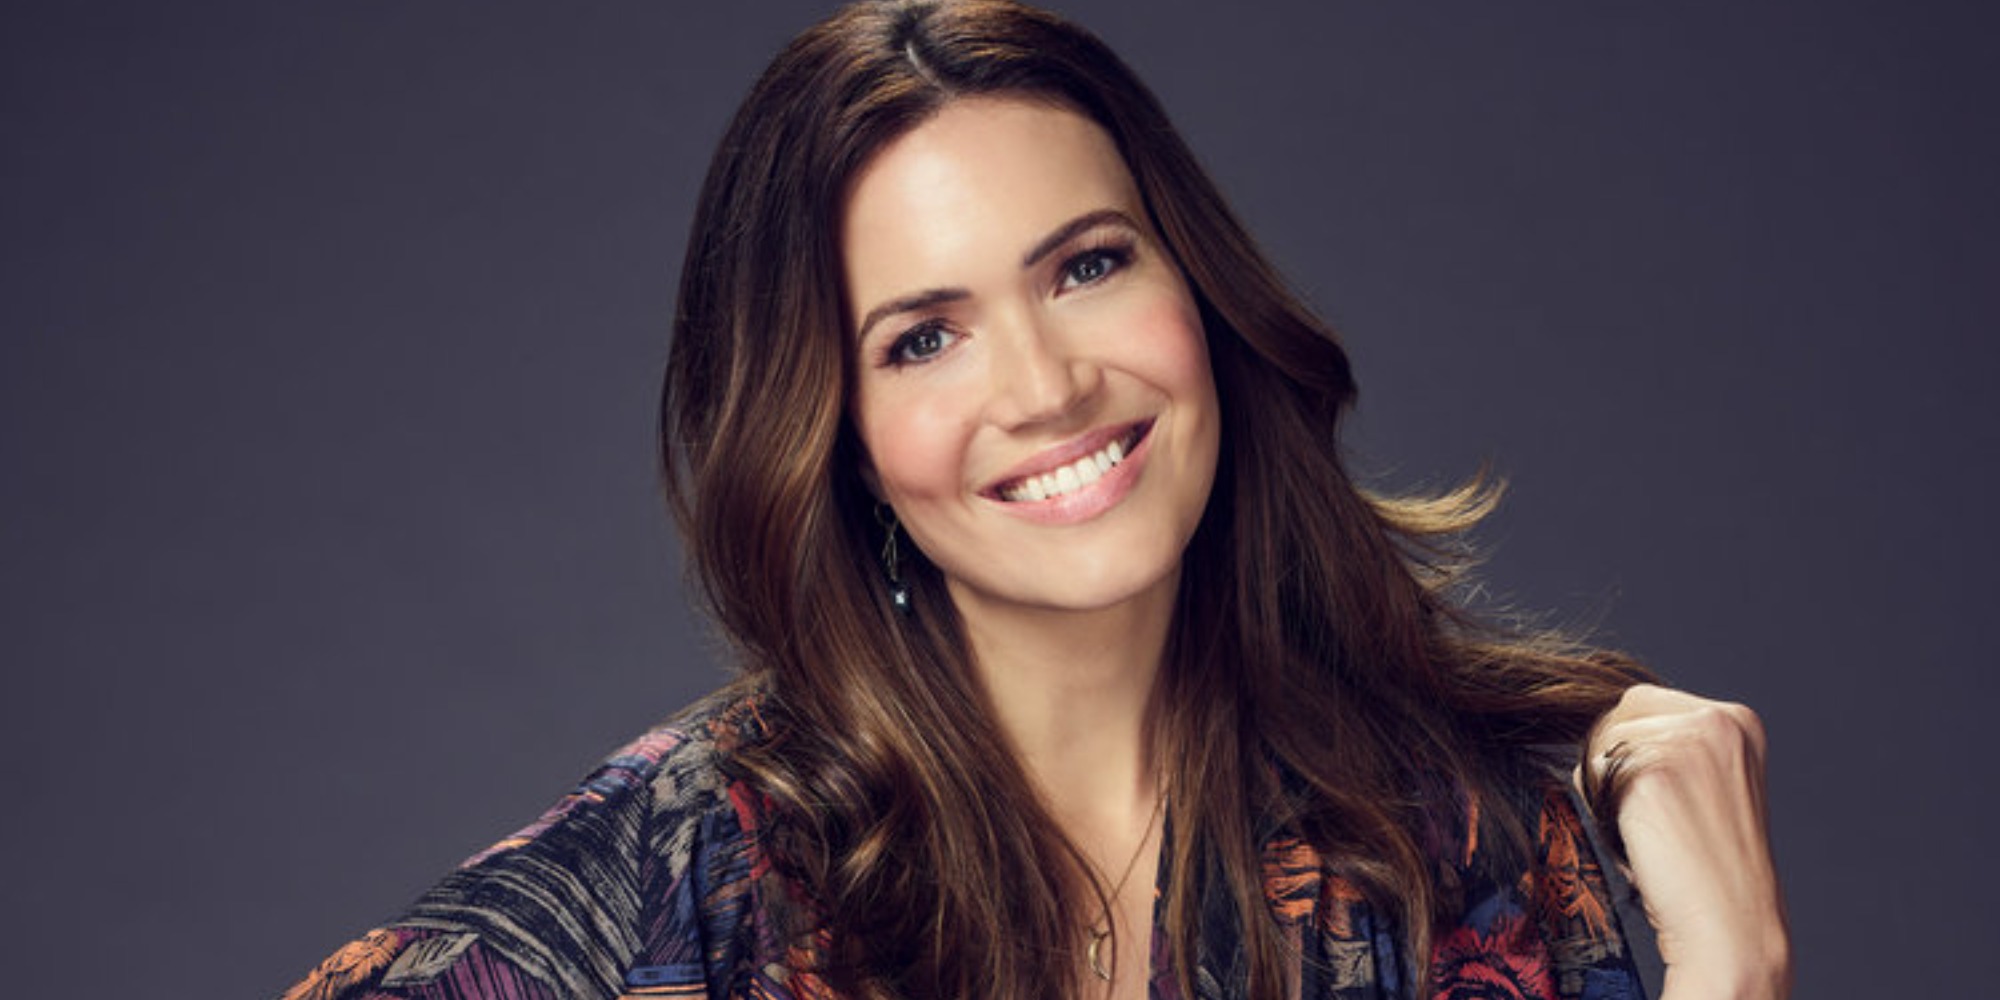 Mandy Moore as Rebecca Pearson on "This Is Us."